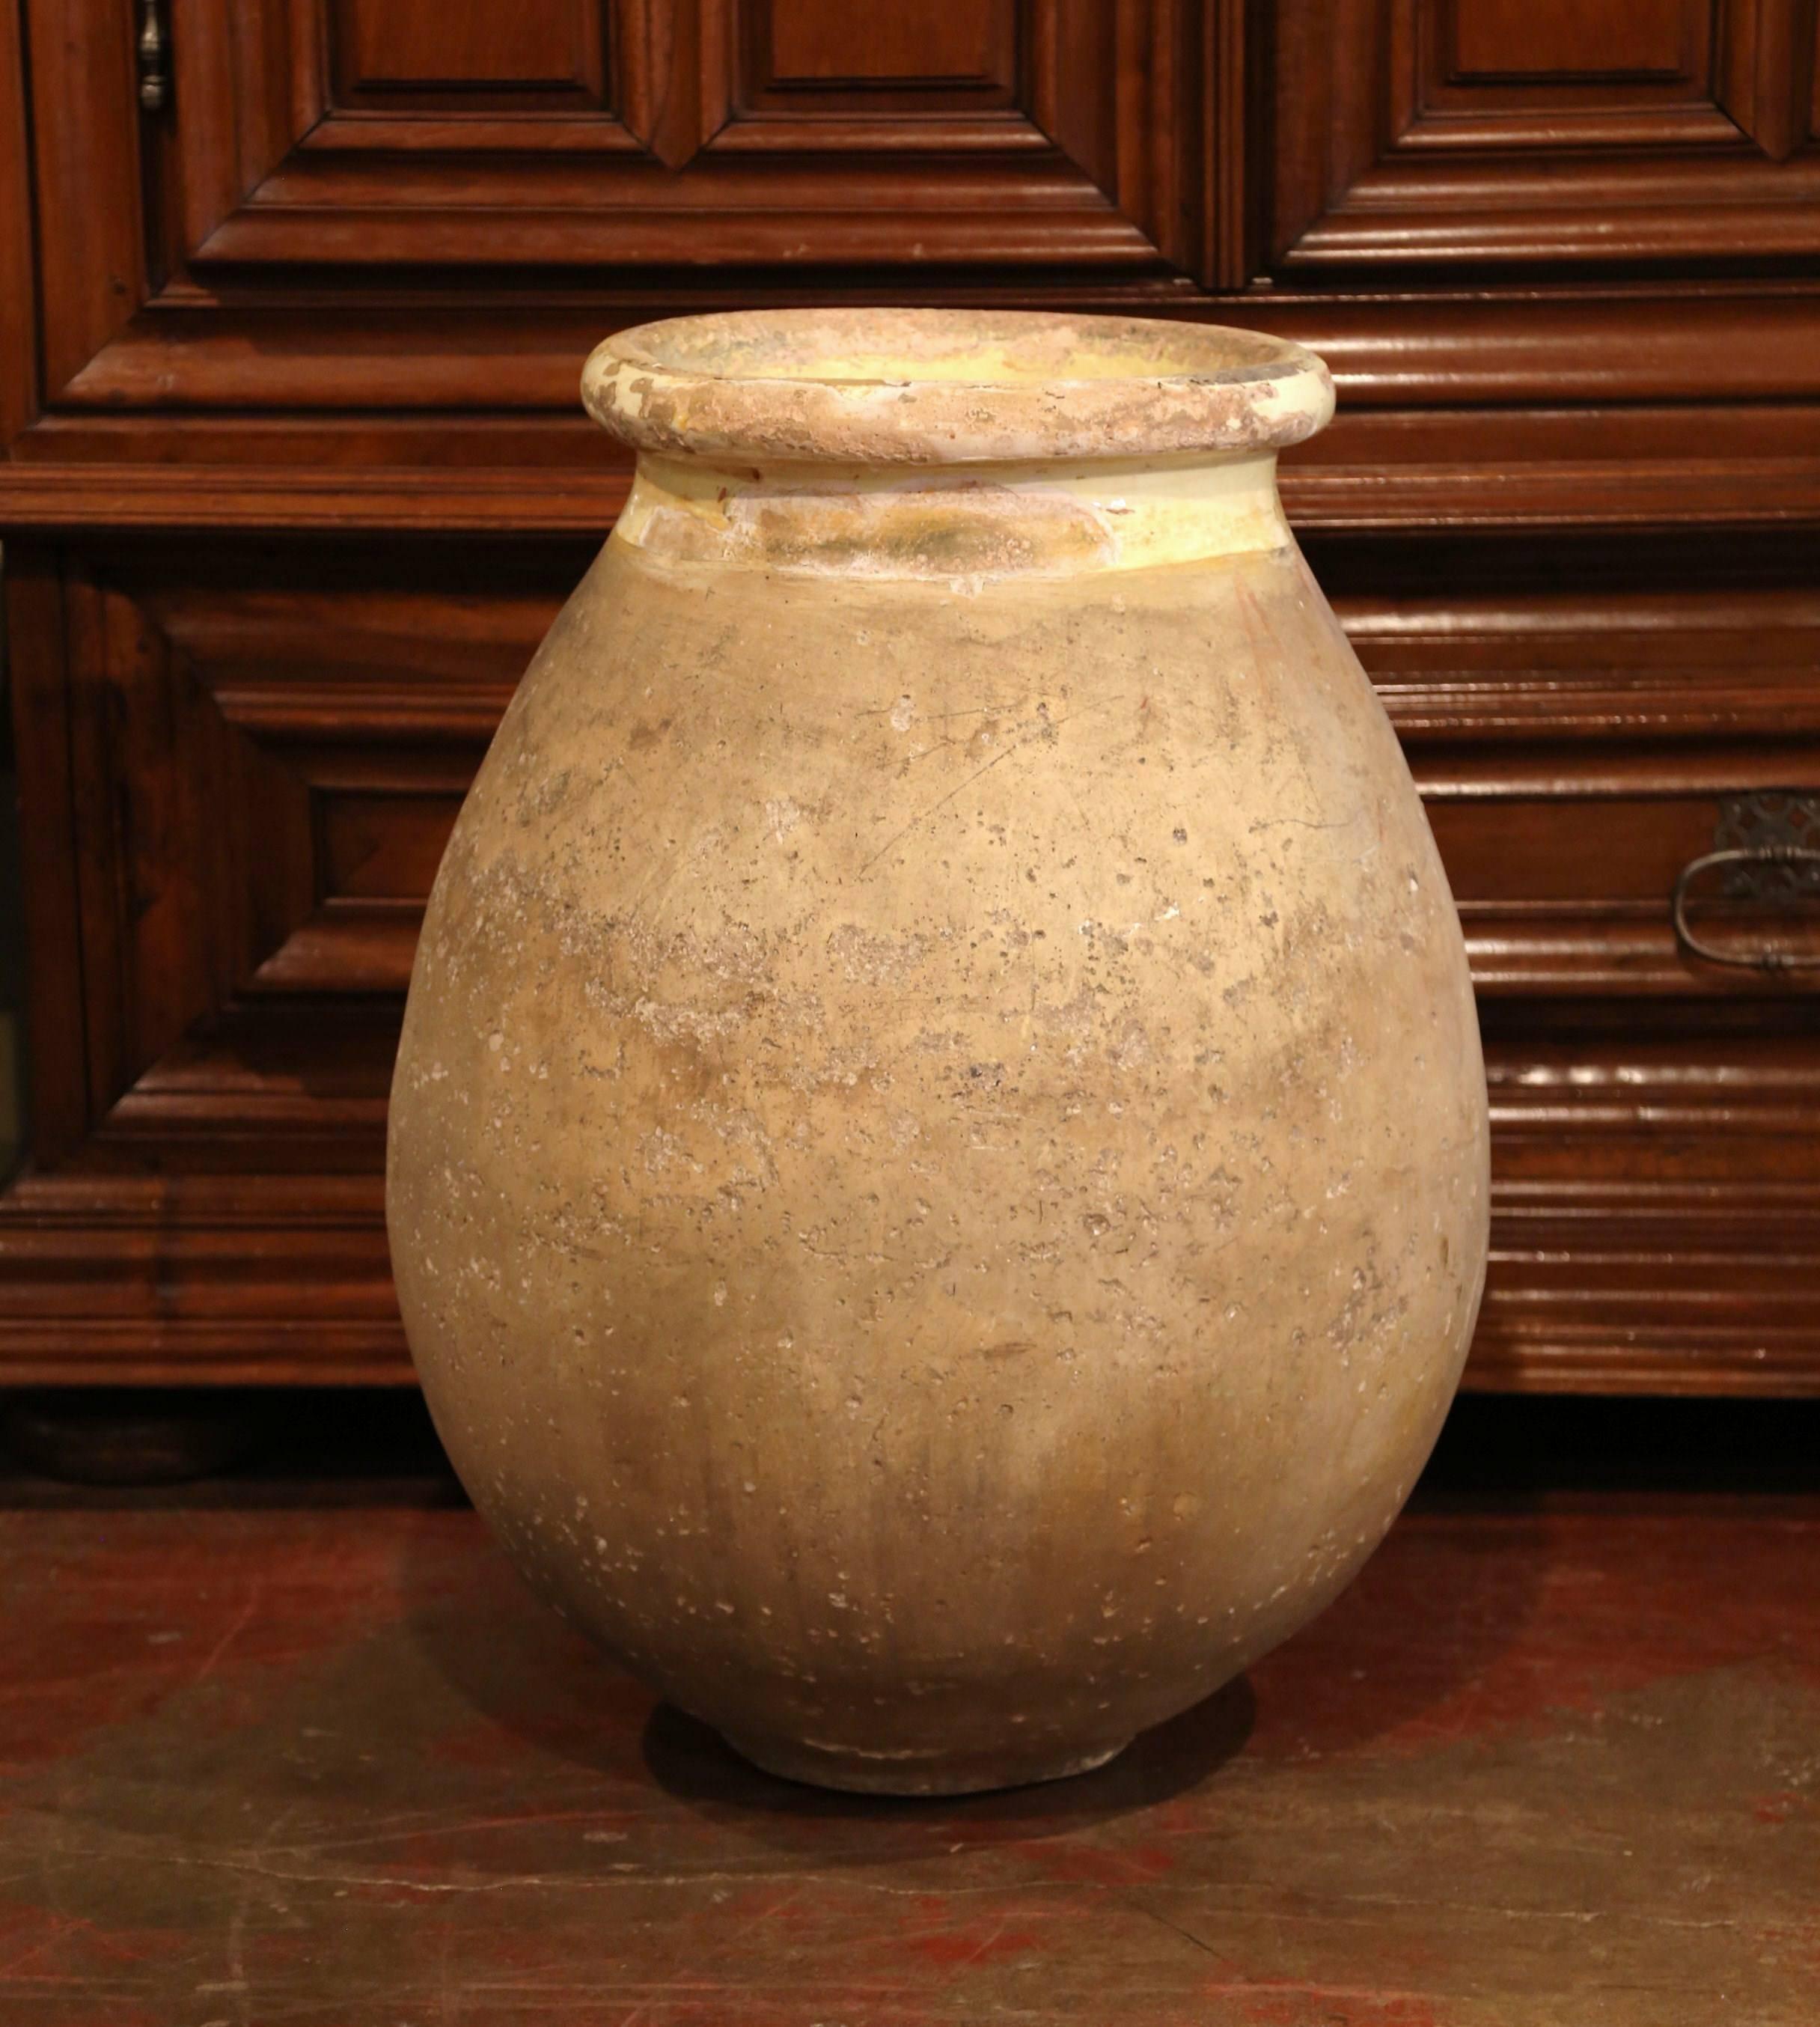 This large, antique earthenware olive jar was created in Southern France, circa 1870. Made of blond clay and neutral in color, the terracotta has a traditional round shape; the pot features a yellow glaze around the neck and trim, and a natural